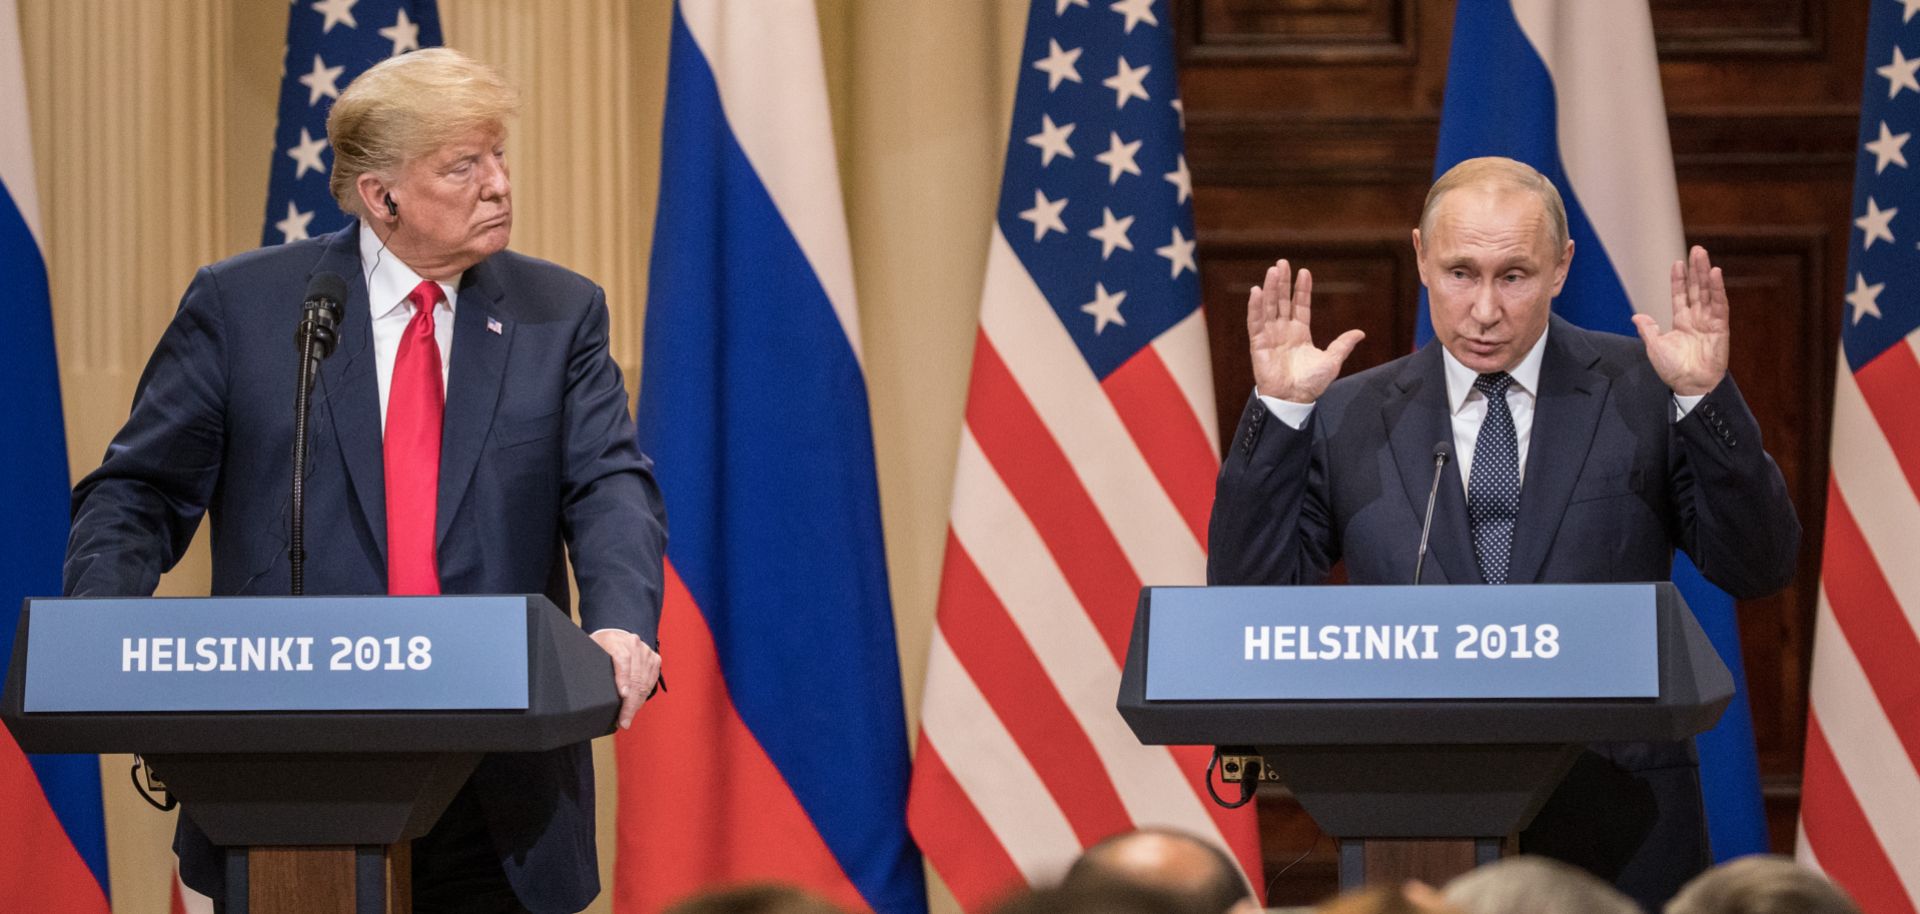 U.S. President Donald Trump (L) and Russian President Vladimir Putin answer questions about the 2016 U.S. Election collusion during a joint press conference after their summit on July 16, 2018, in Helsinki, Finland. 